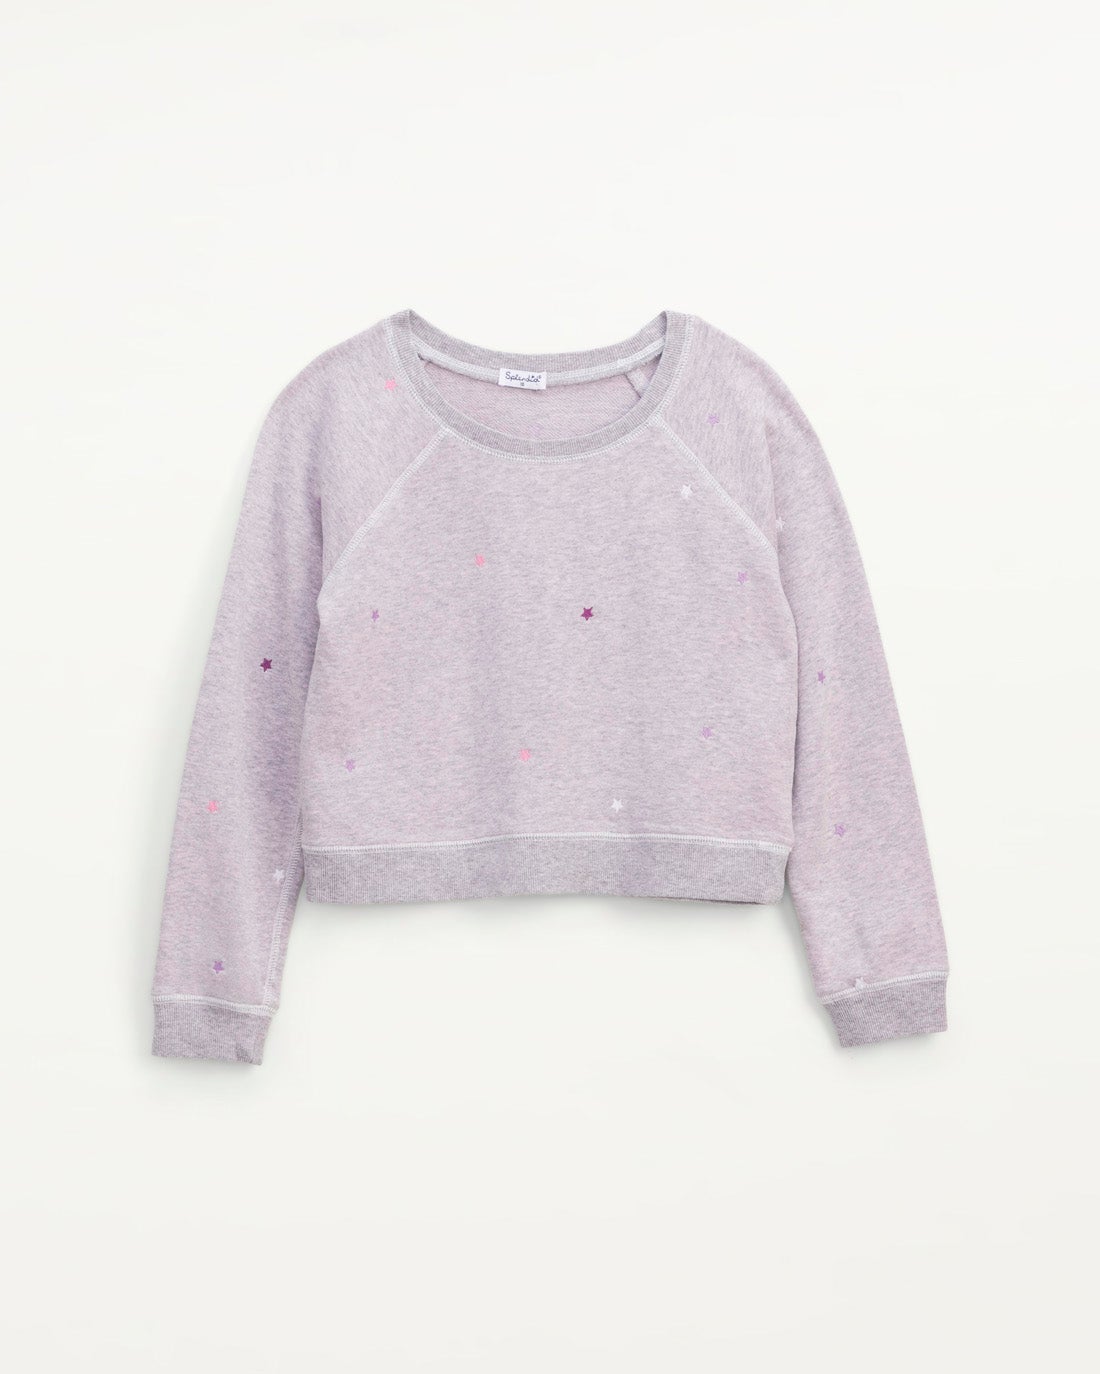 Lilac Star Embroidered Top